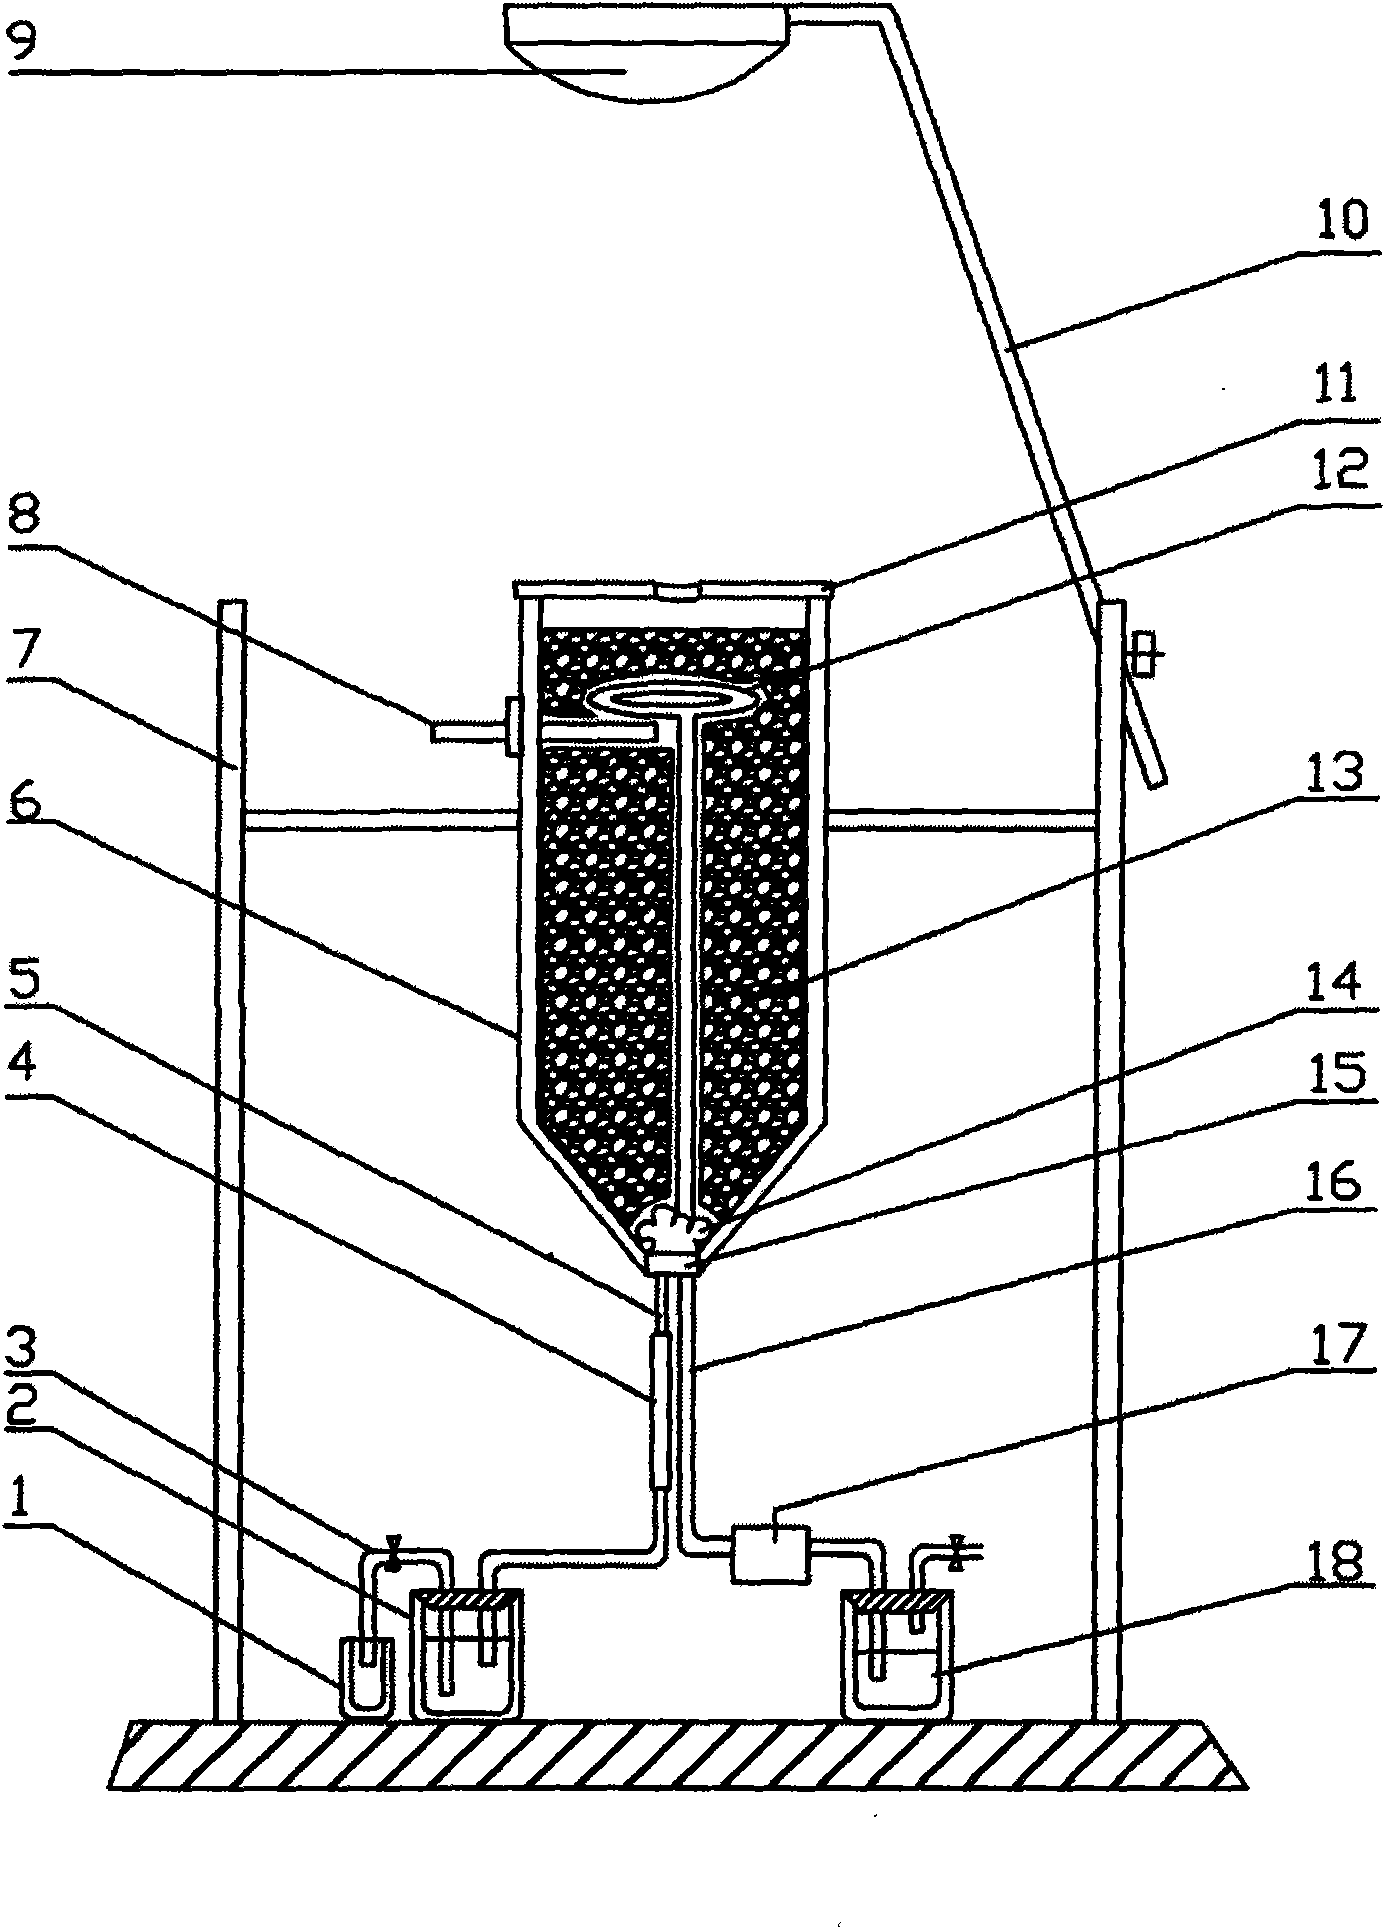 Device for collecting root exudate in situ